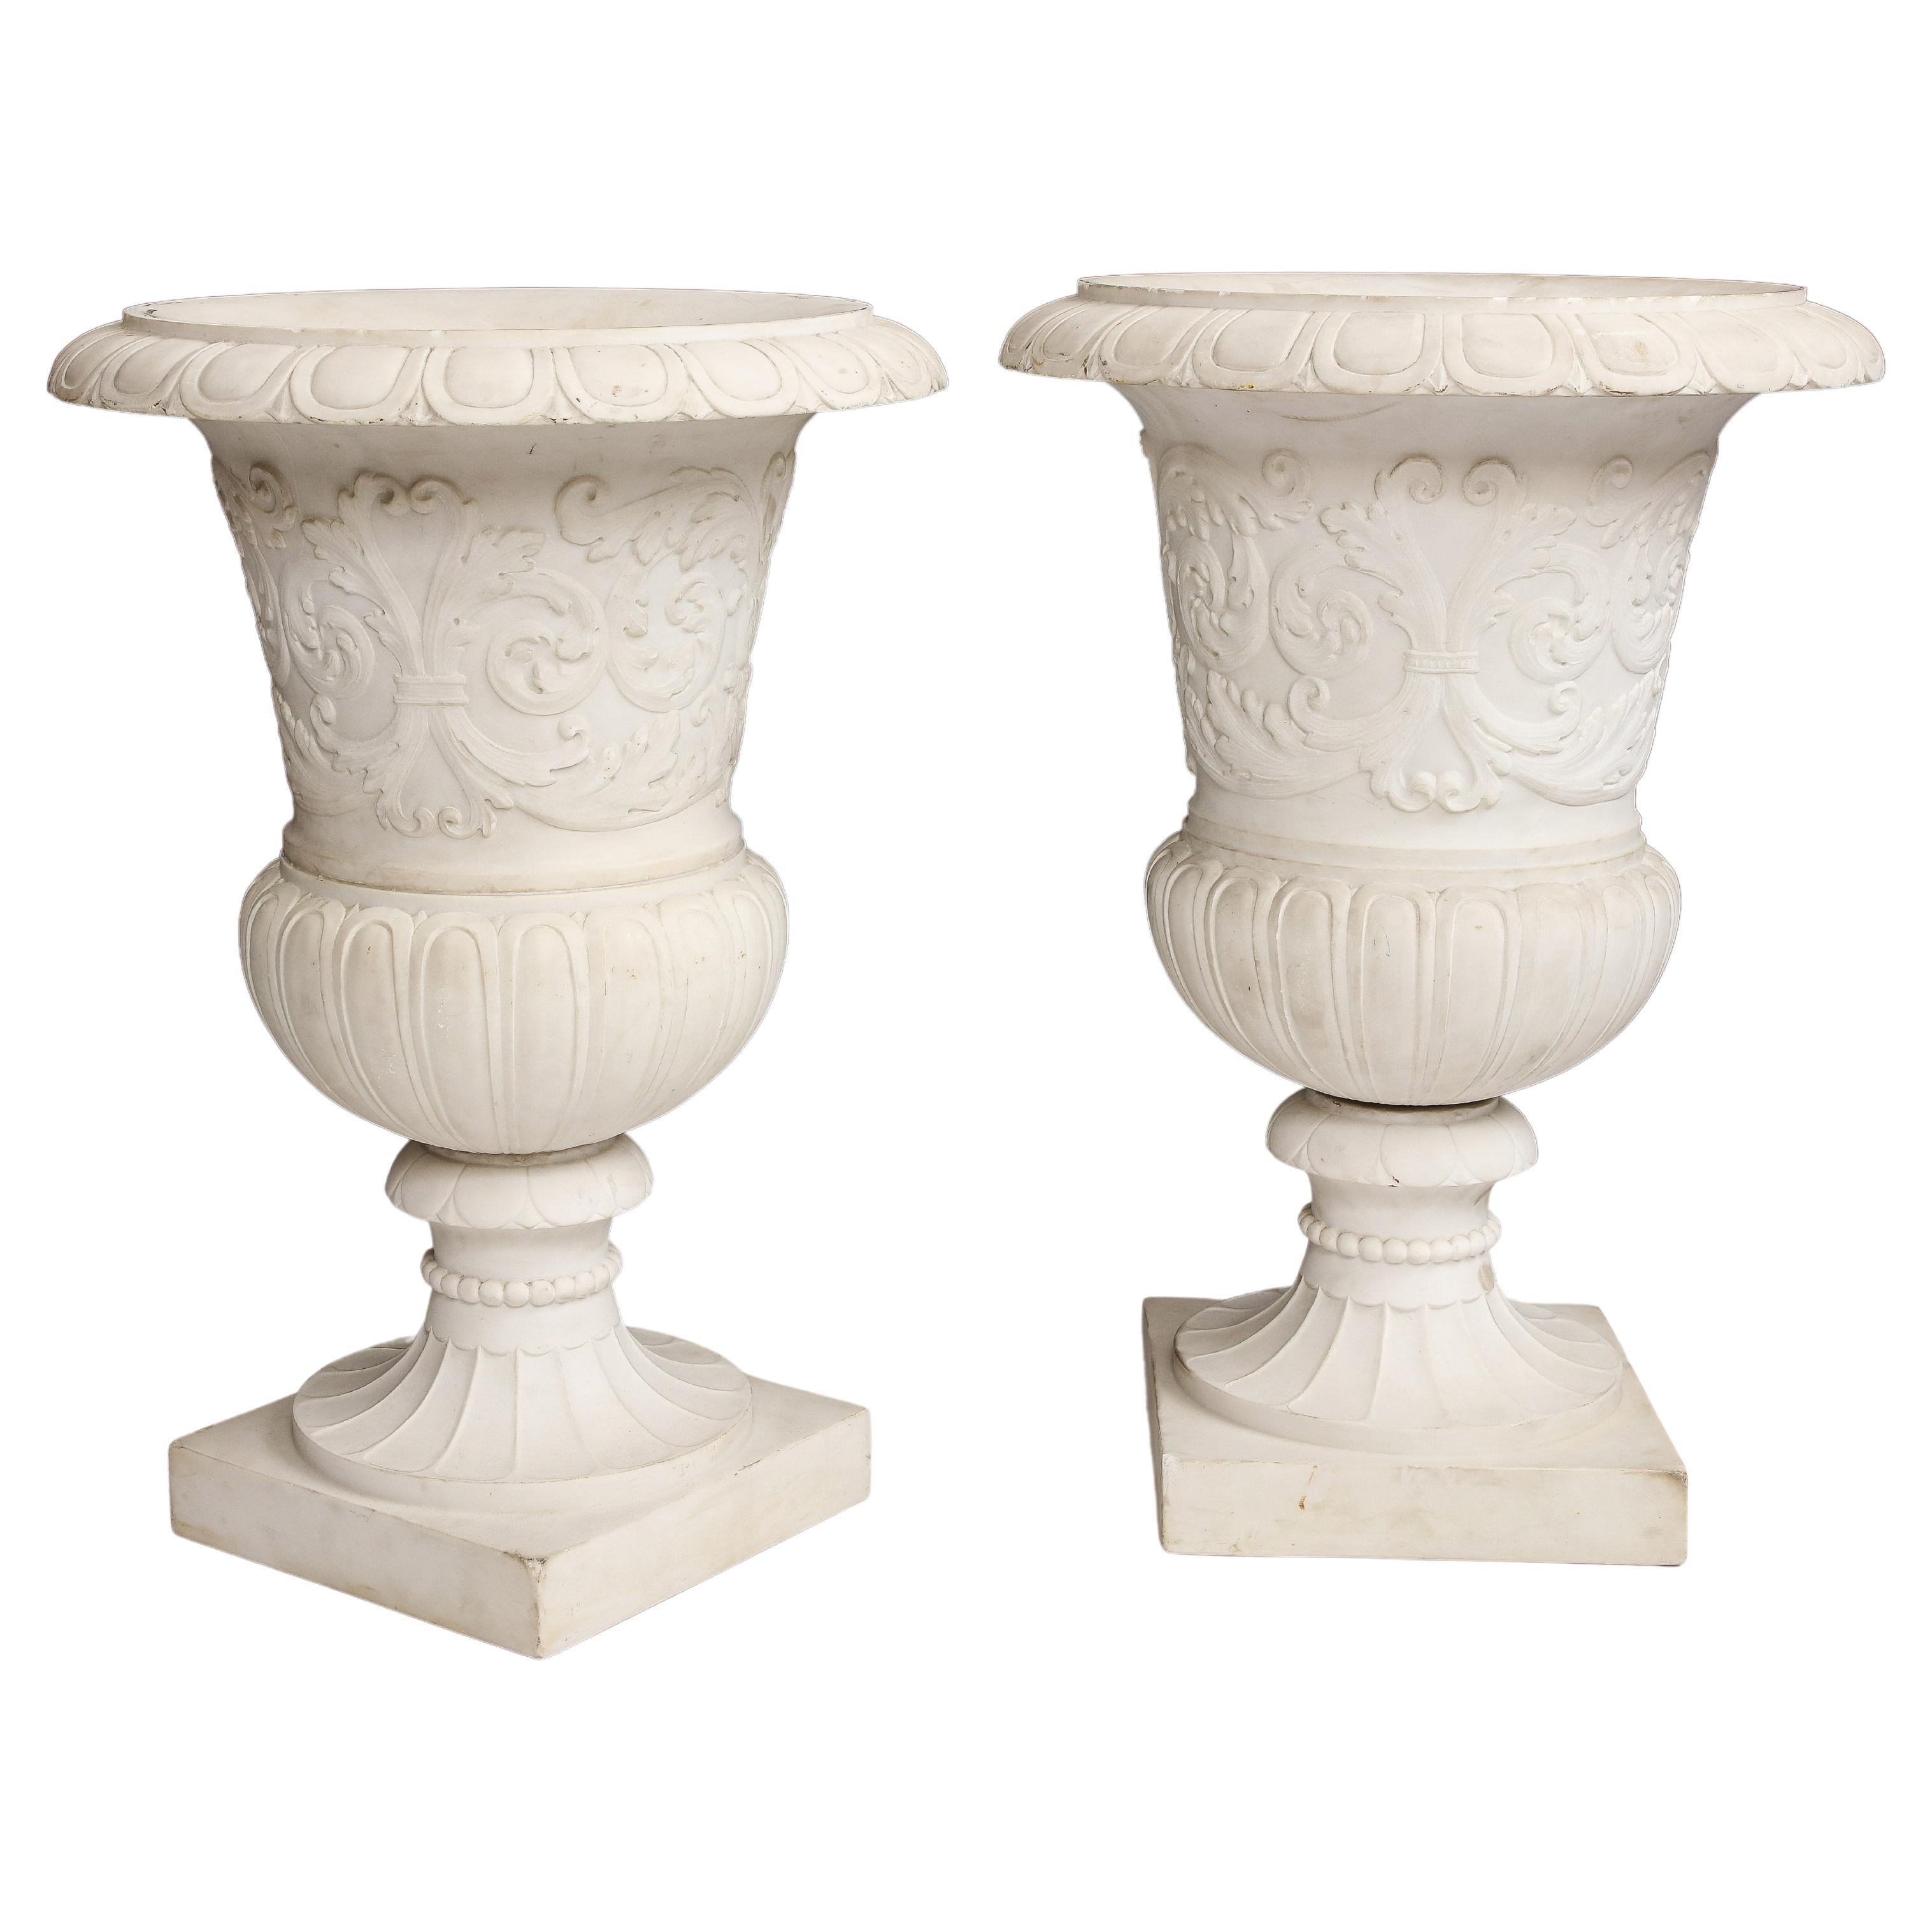 Pair of Italian Carrara Marble Medici Vases w/ Neoclassical Motifs in Relief For Sale